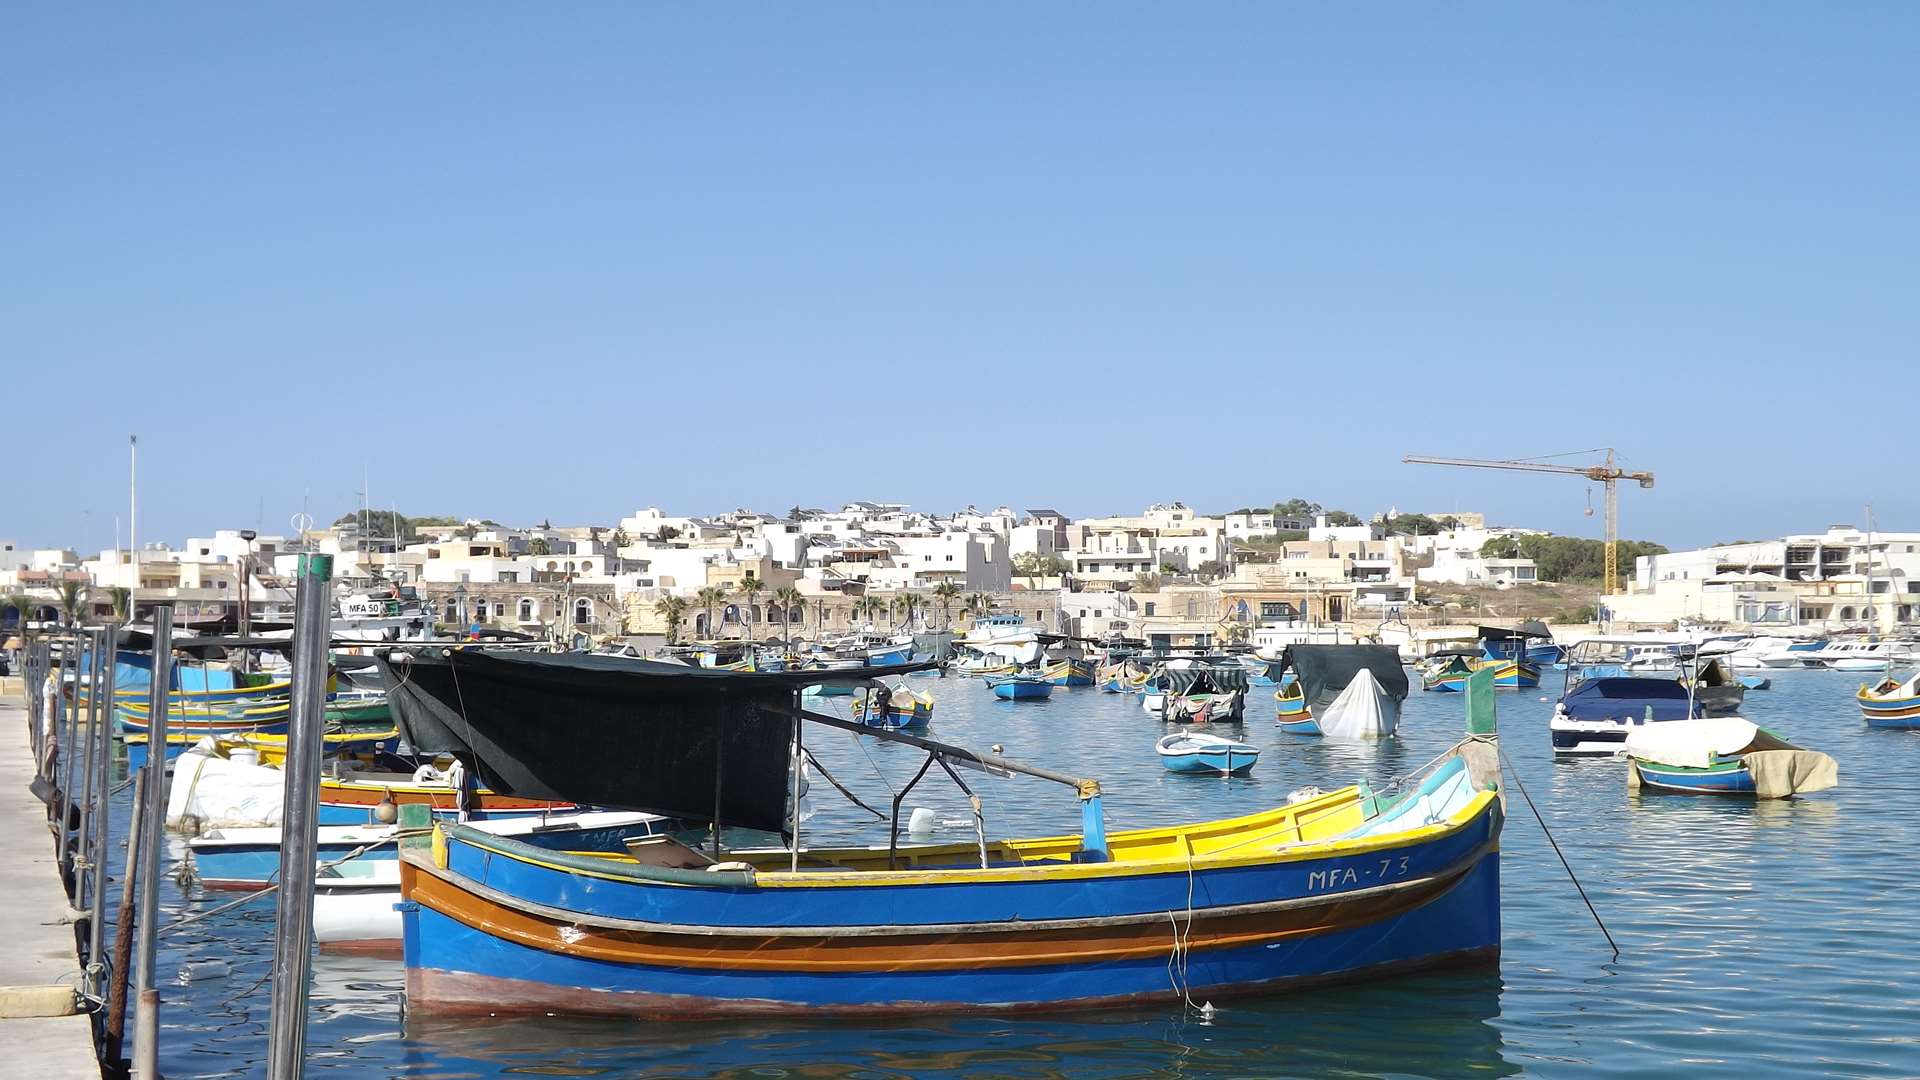 A traditional way of Maltese life can still be found in Marsaxlokk